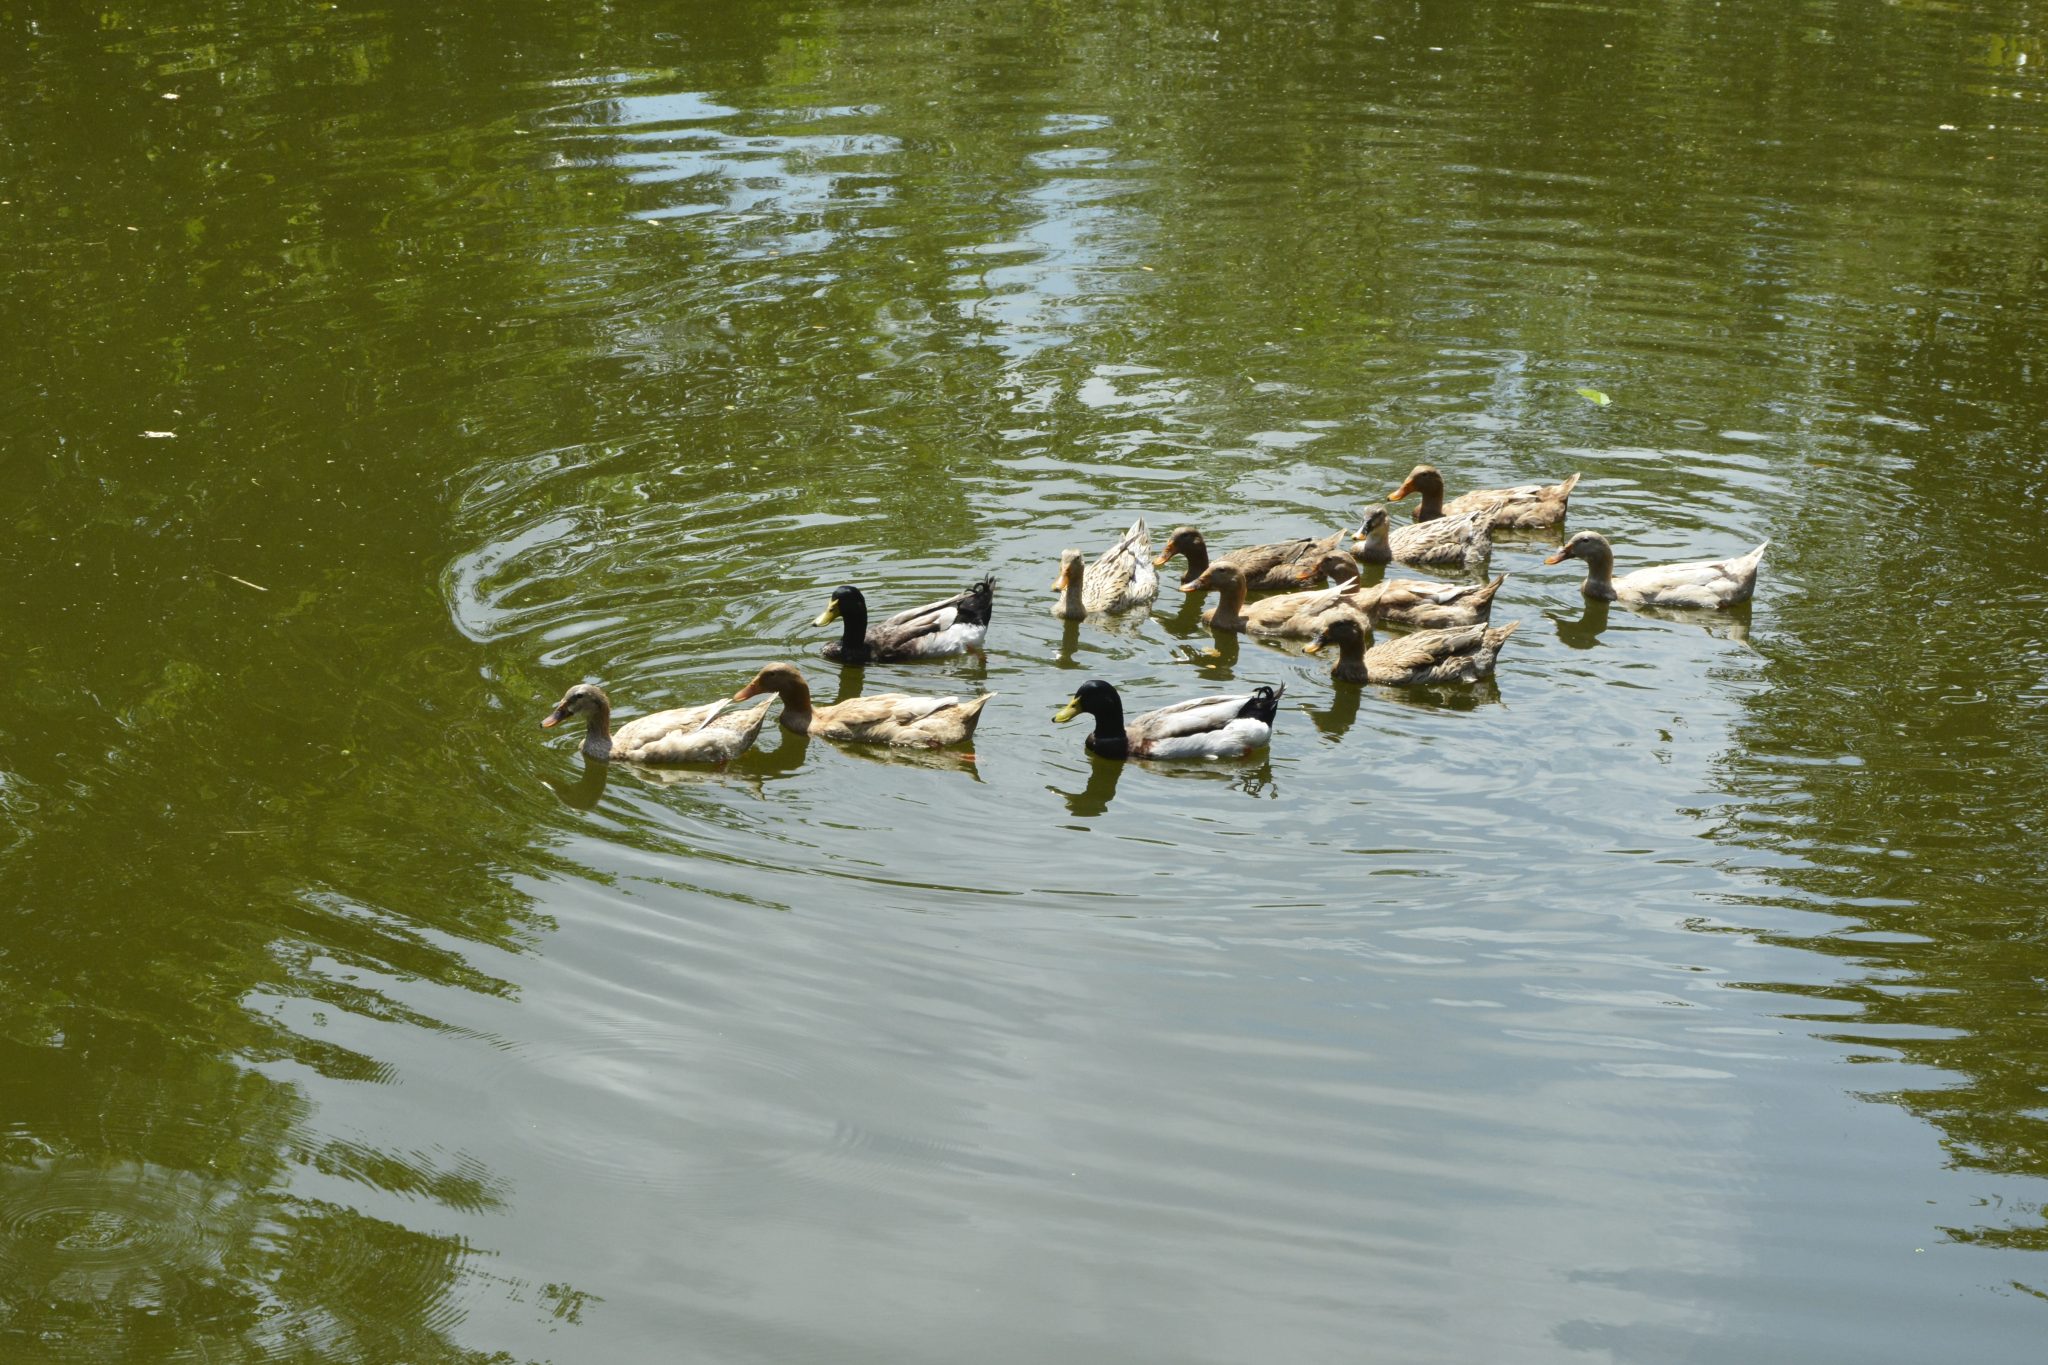 A flock of ducks floating on a pond